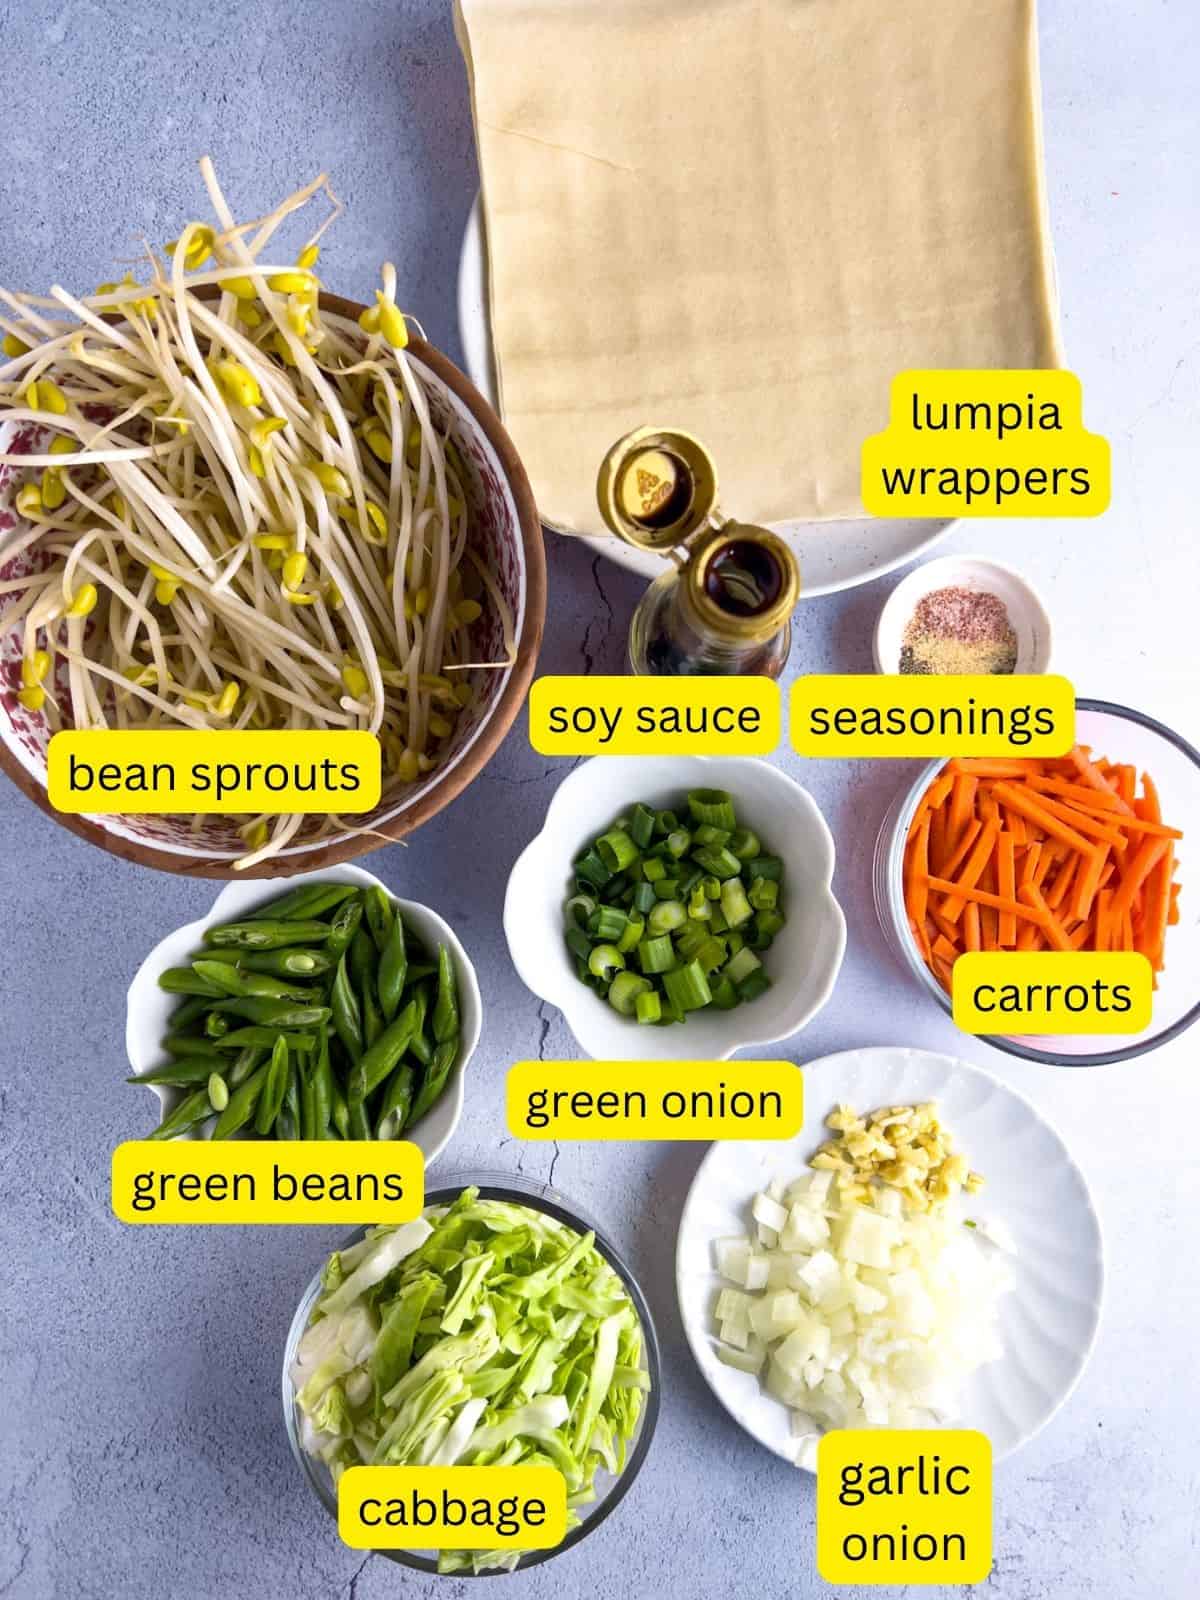 Ingredients for vegetable lumpia.